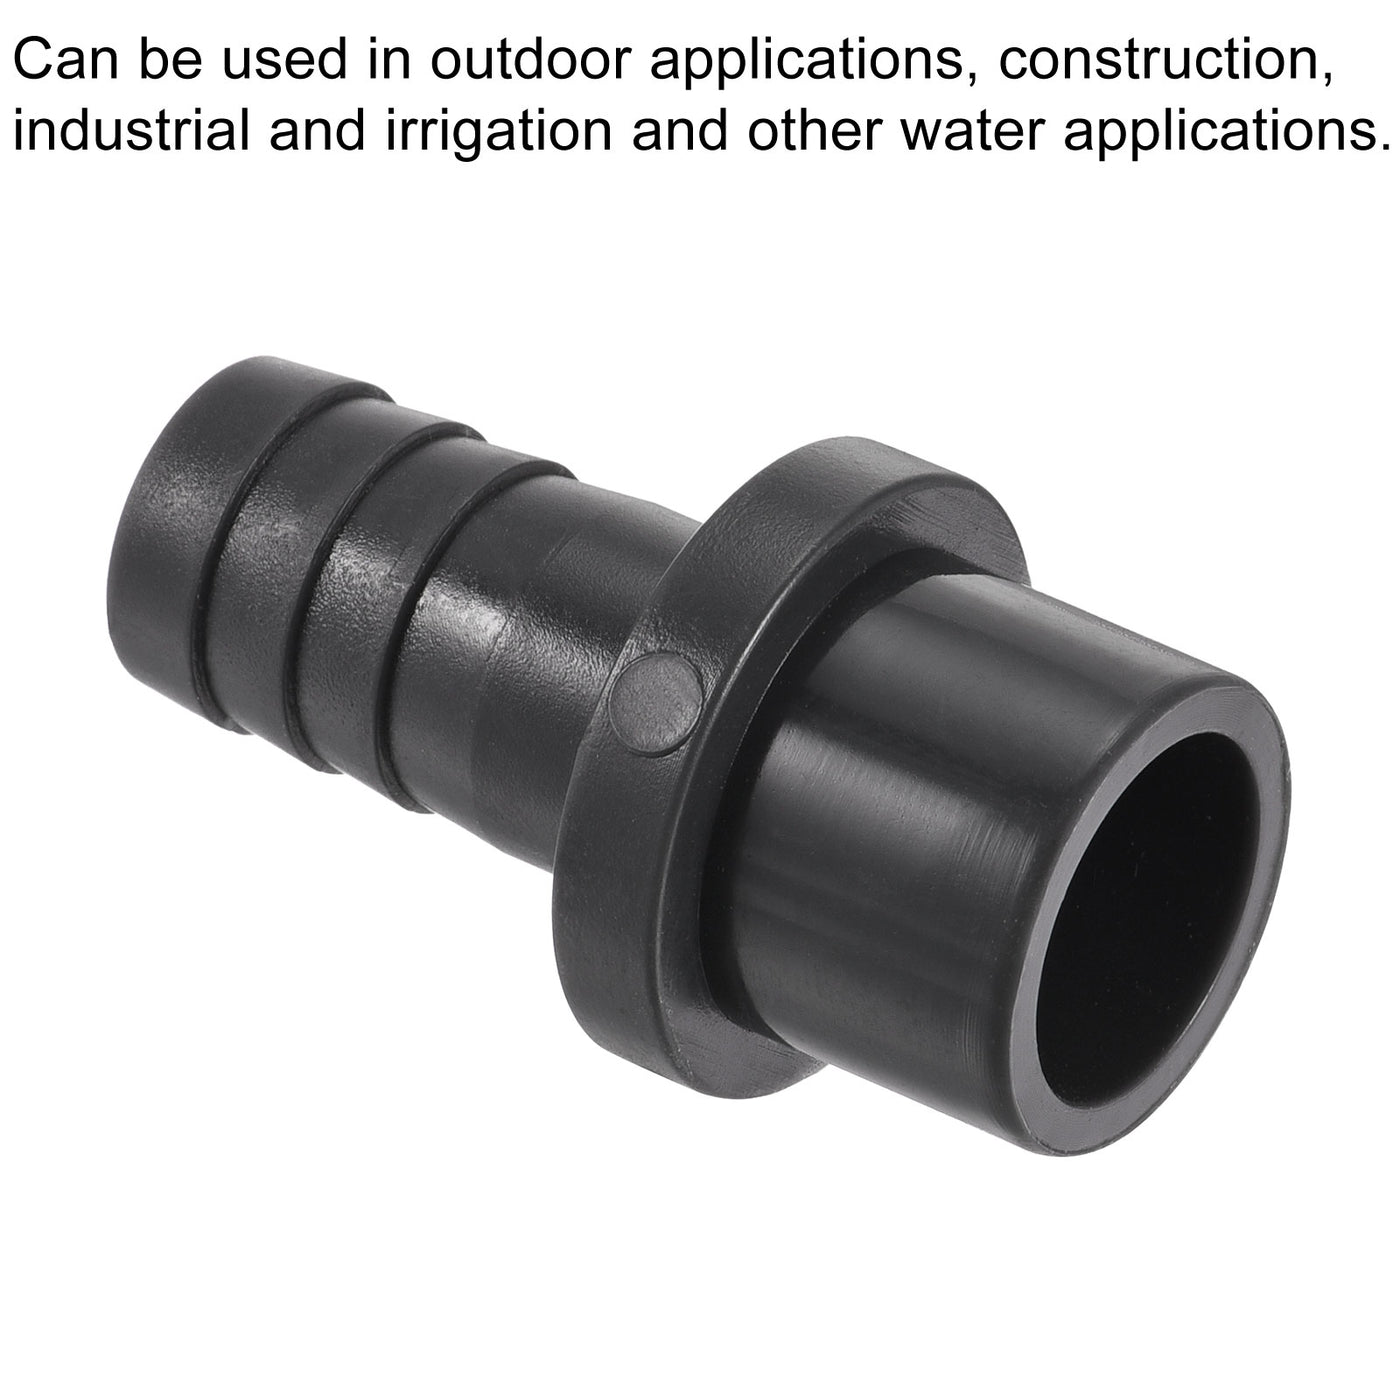 Harfington 3Pcs PVC Pipe Fitting 14mm Barbed x 20mm OD Spigot Straight Hose Connector Black